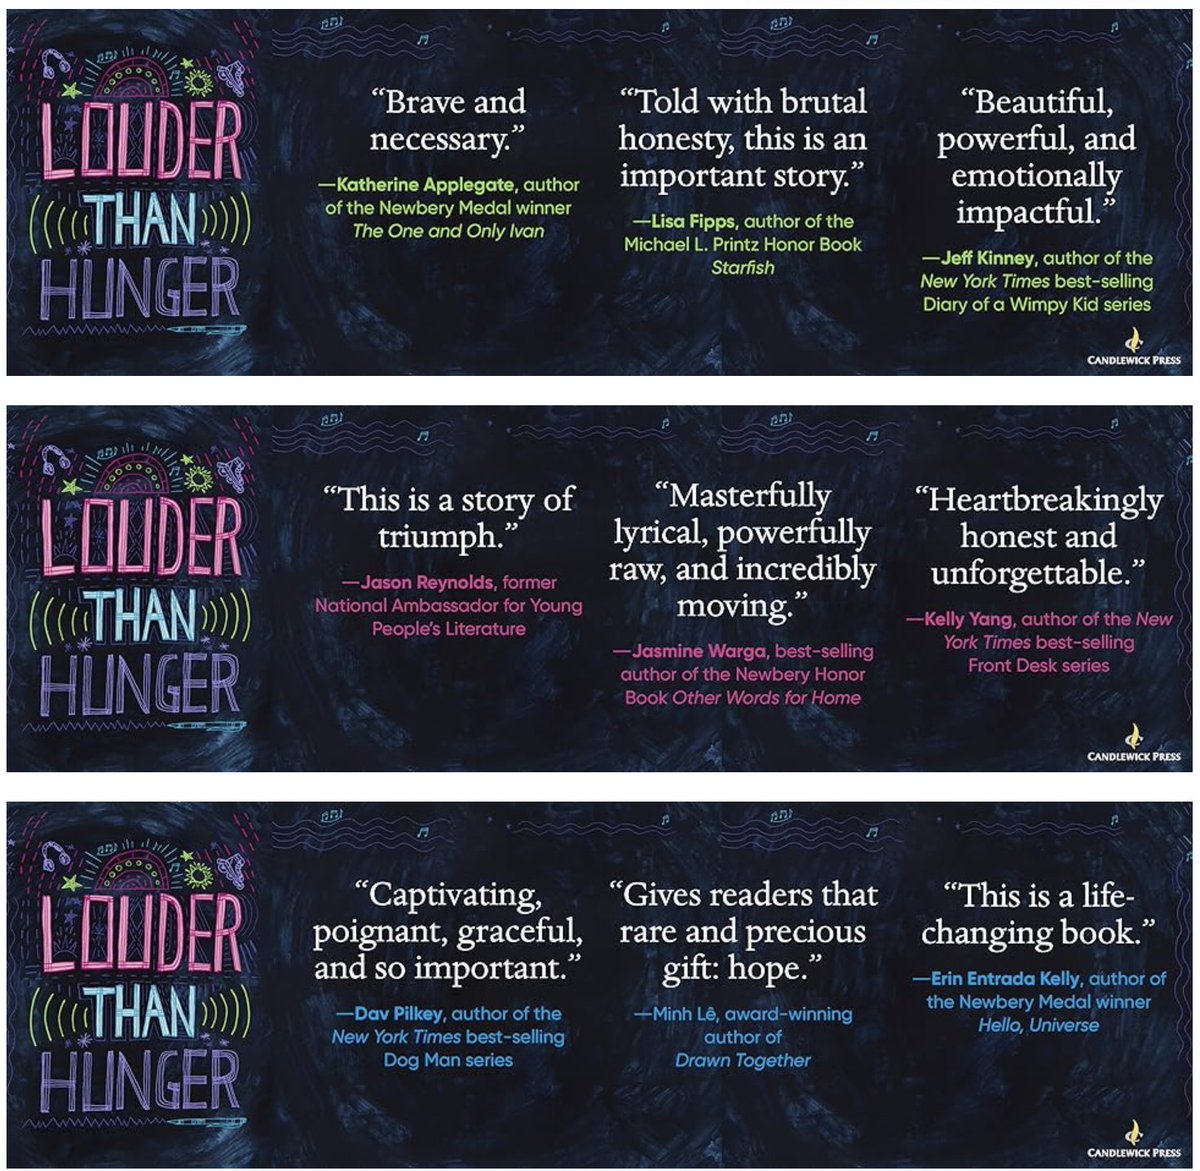 I'm giving away 5 signed copies of Louder Than Hunger to 1 teacher or teacher-librarian to give away to students and/or colleagues. RT before 10:00 p.m. CDT on 3/12 (today) to enter the drawing. I'll order the copies from @AndersonsBkshp. andersonsbookshop.com/book/978153622…